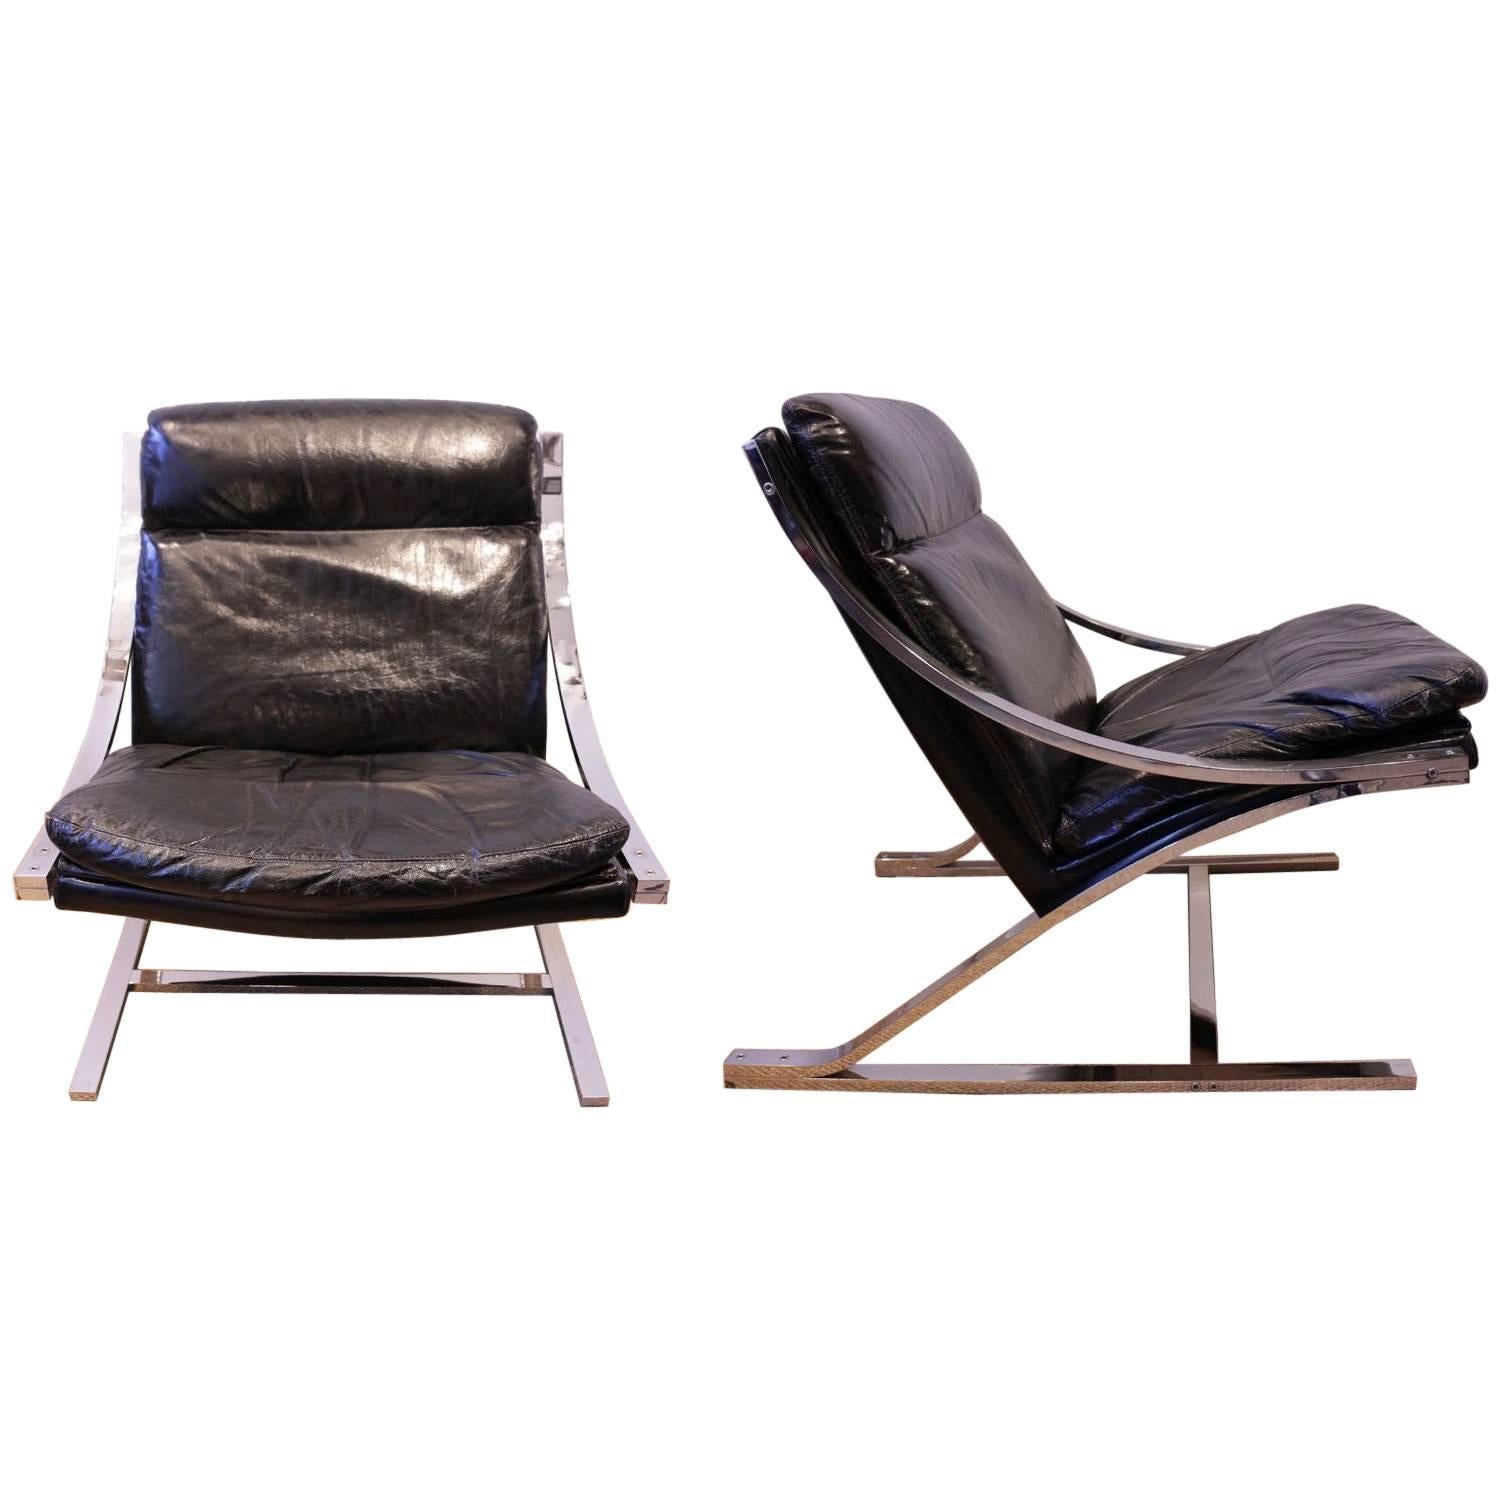 Pair of Black Leather and Chrome Metal "Zeta" Armchairs by Paul Tuttle, 1968